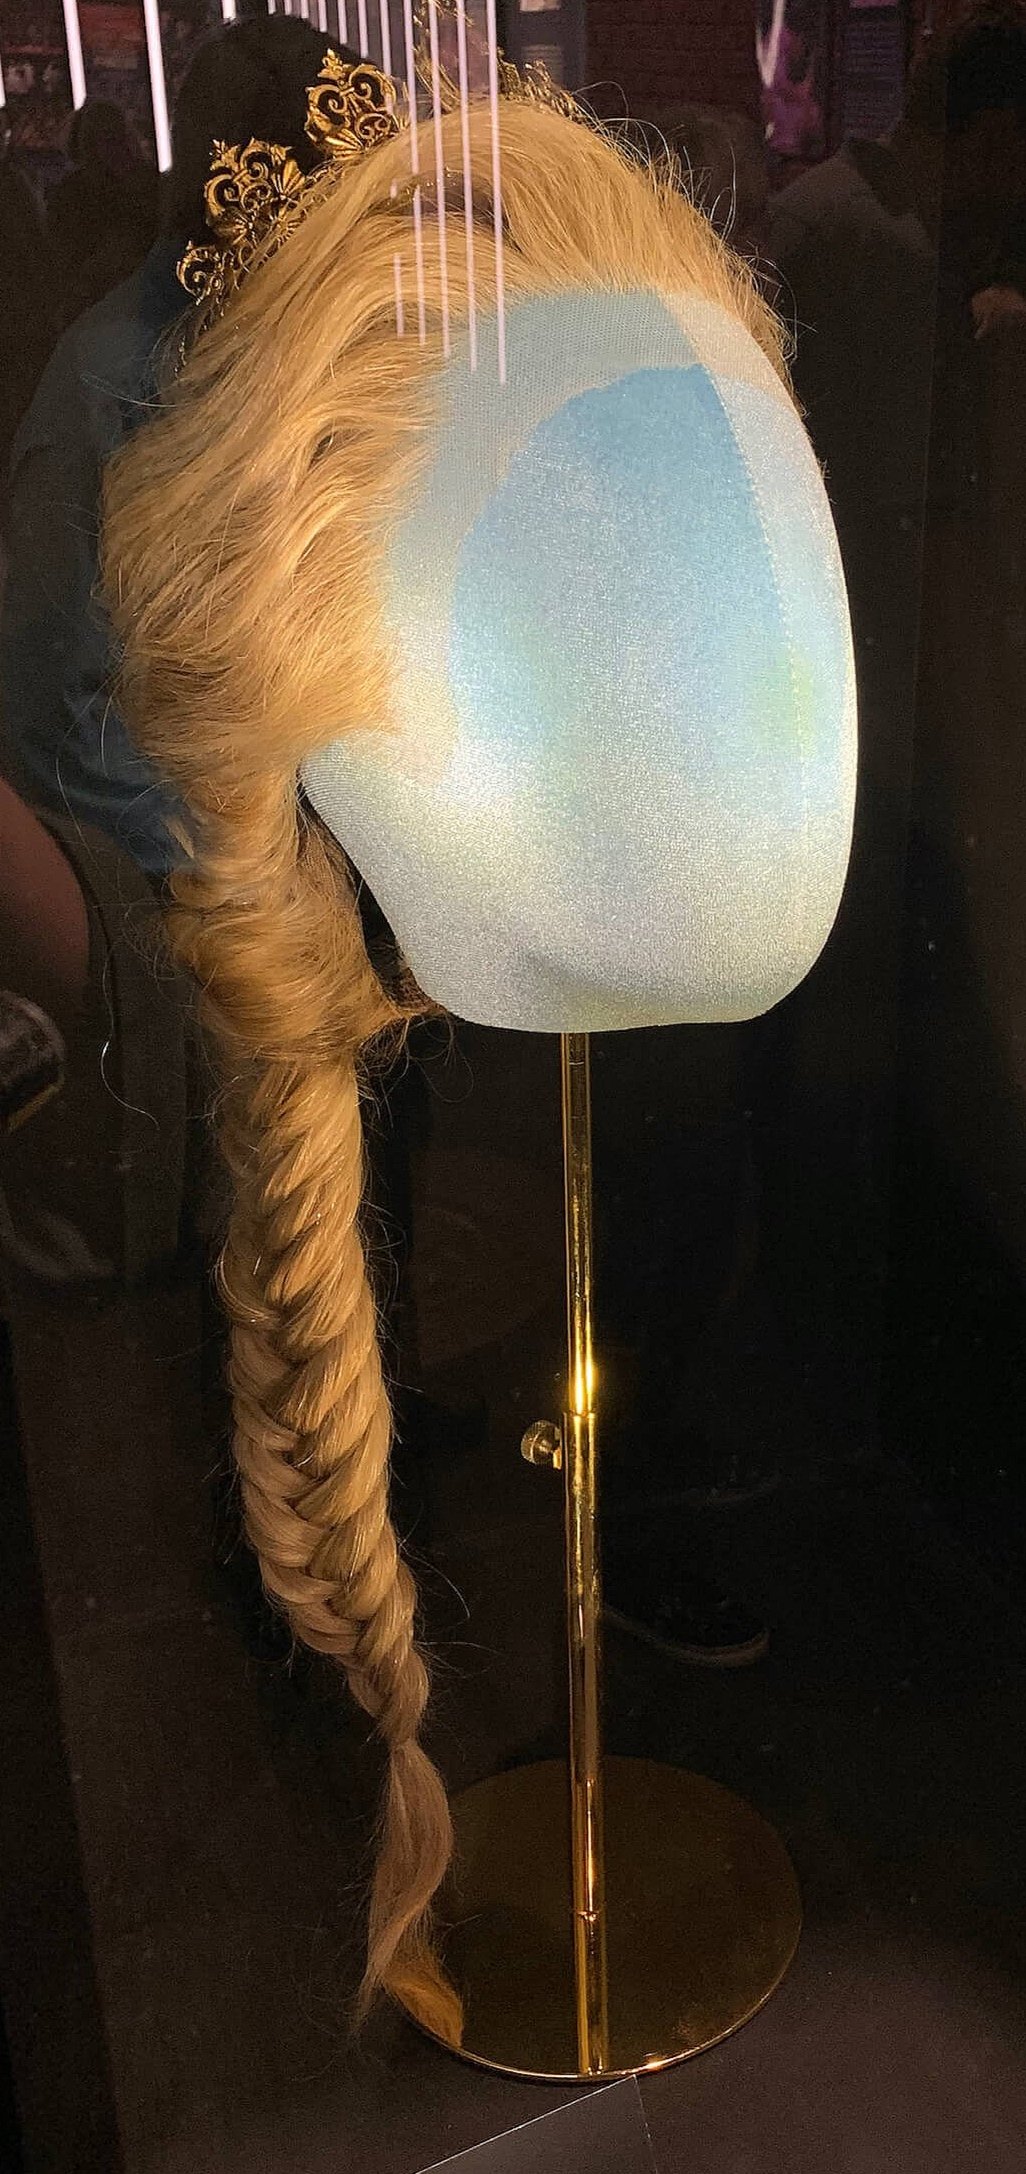  An Elsa wig and crown from  Frozen   Crown designed by R Kaye Ltd. 